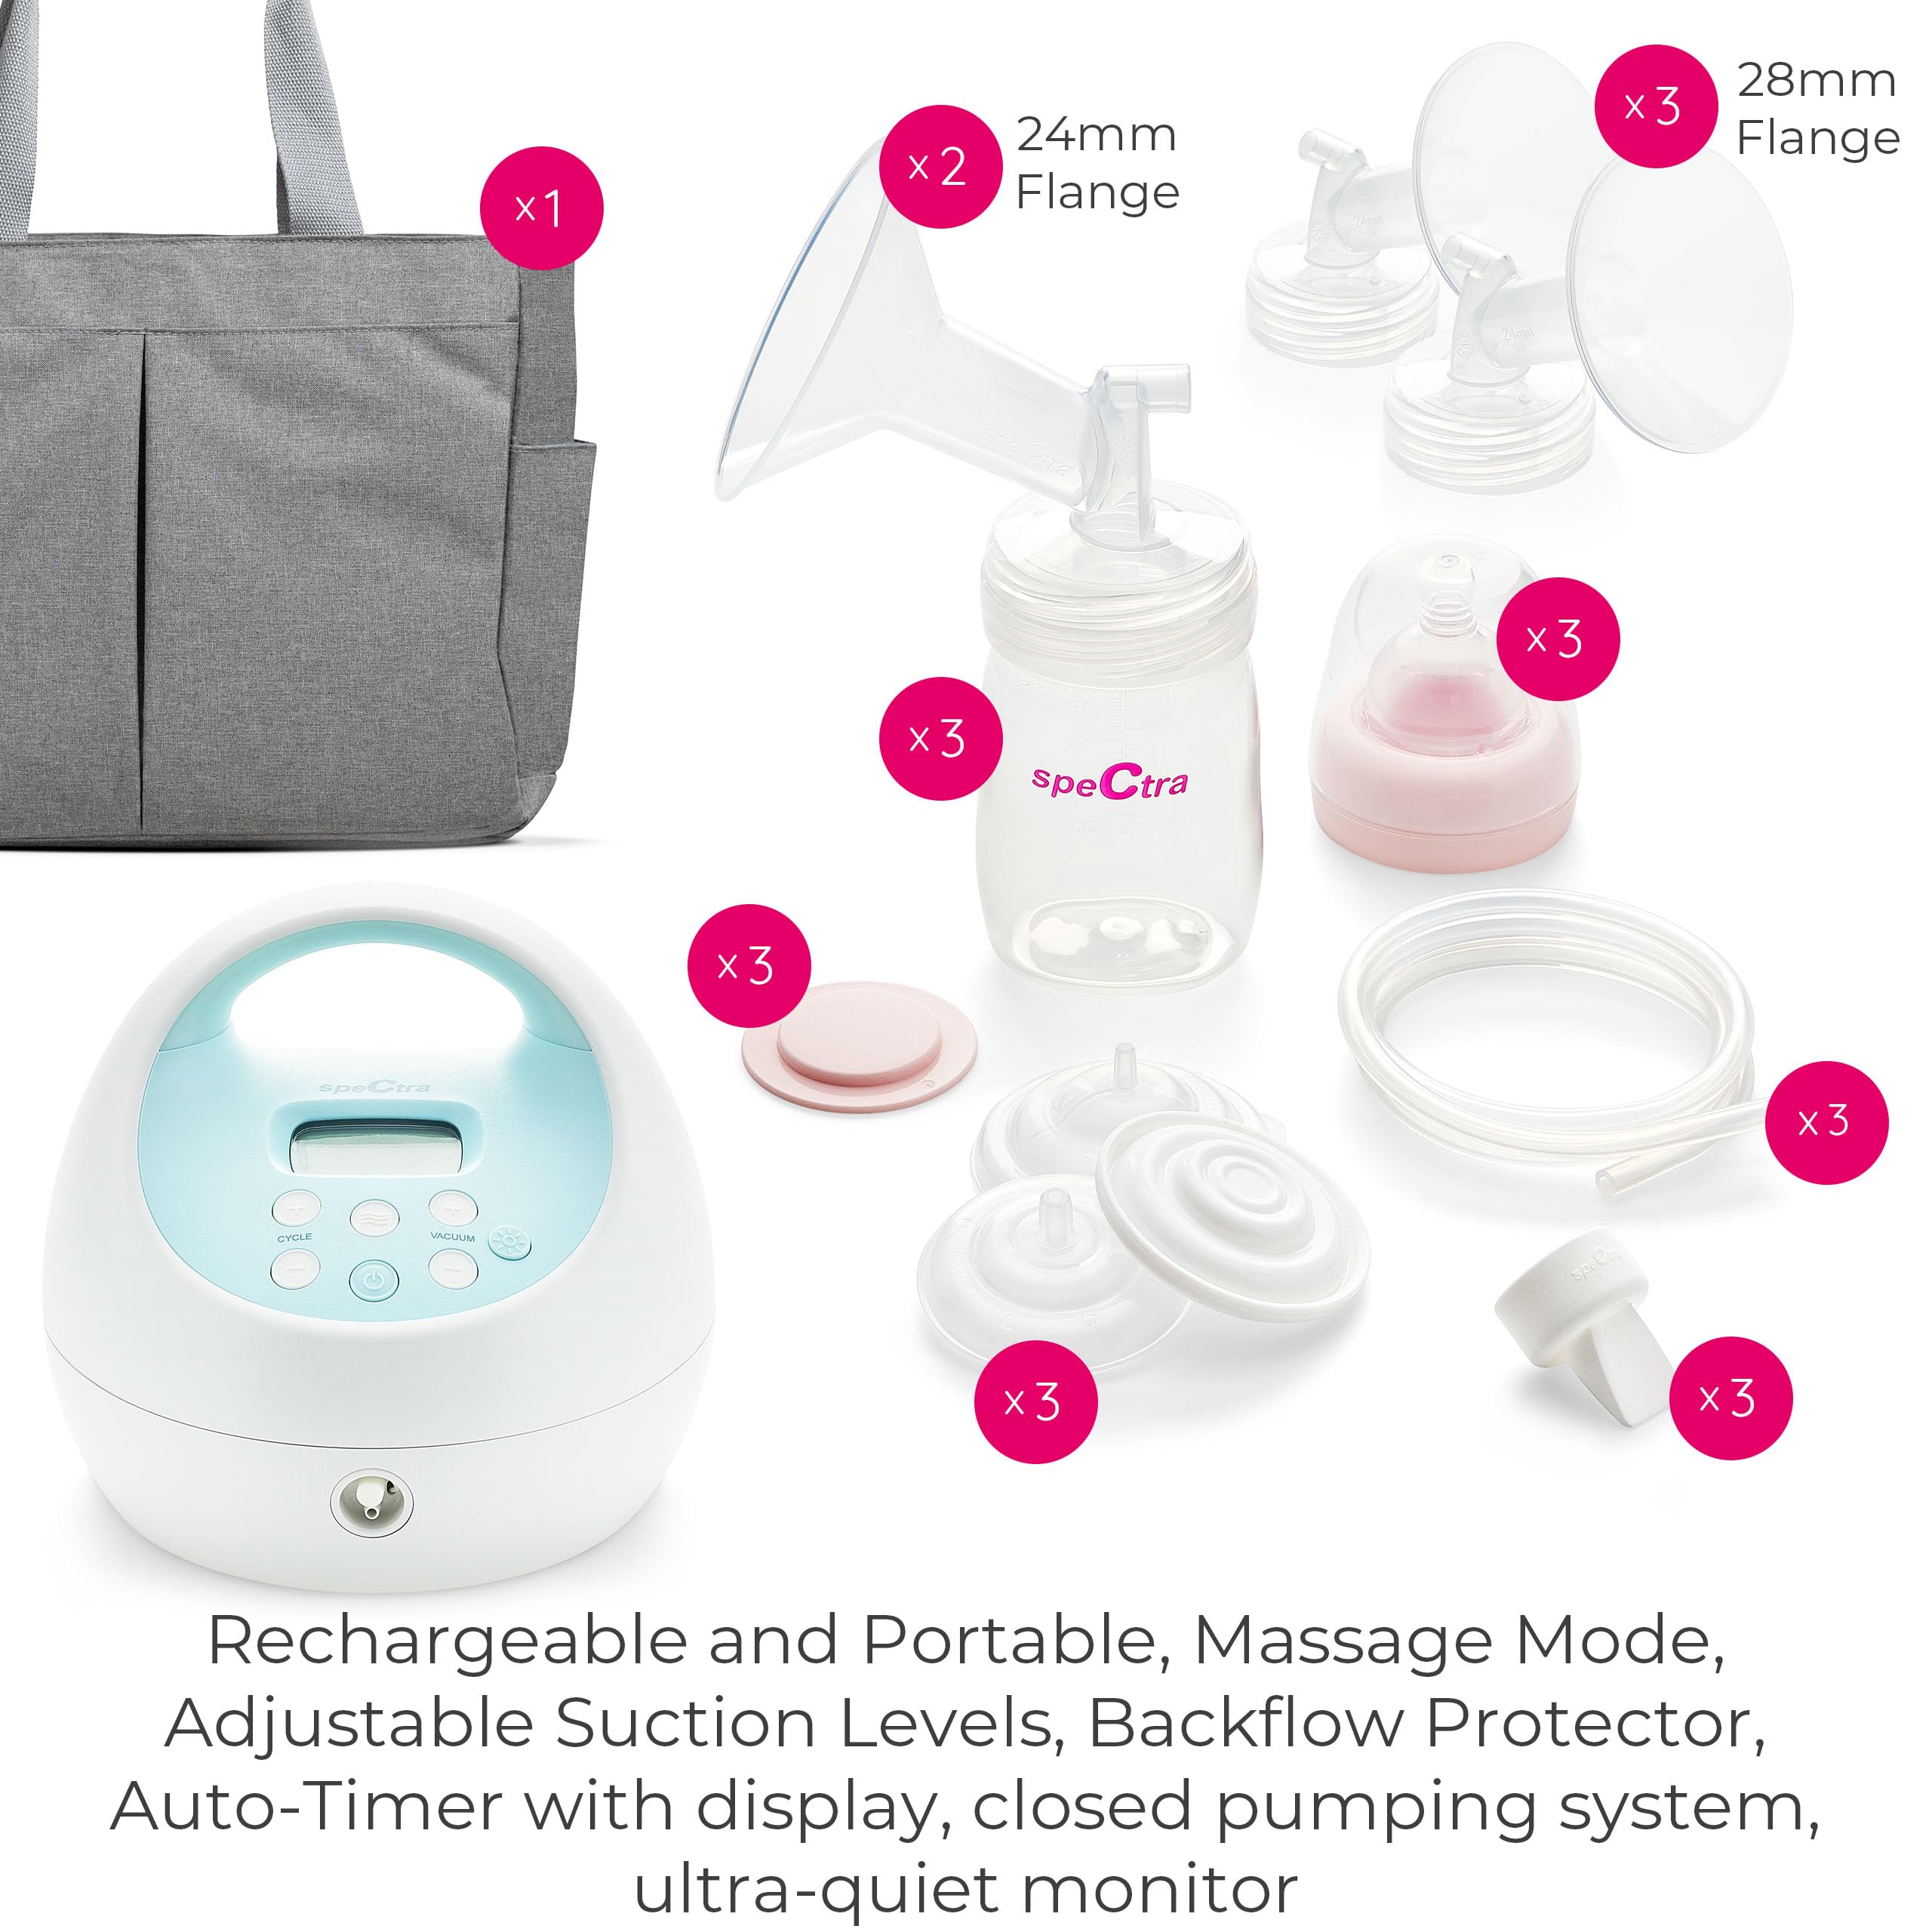 Spectra Baby S1 Plus Premier Rechargeable Breast Pump with Grey Tote Premium Accessory Kit - 28 mm